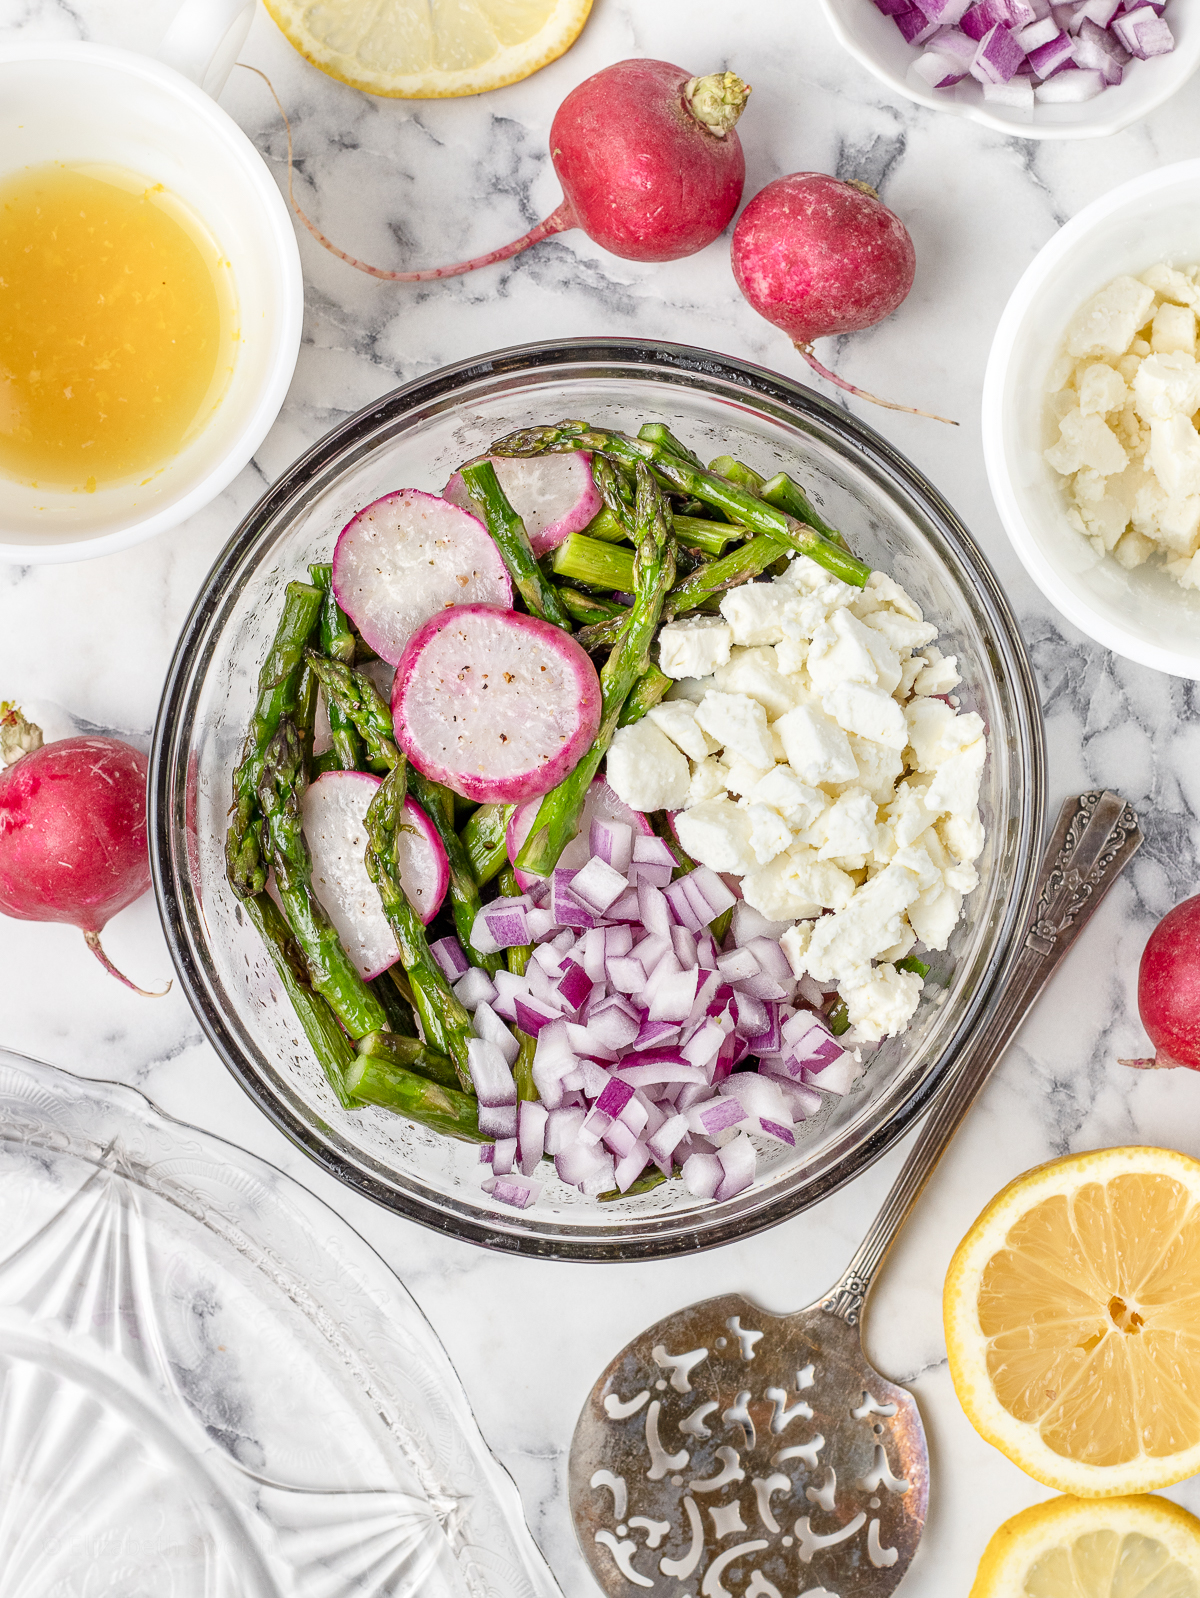 Directions 2. Roasted asparagus and radishes in a bowl with red onion, feta cheese, lemon juice and lemon zest. Ready to be tossed and served.